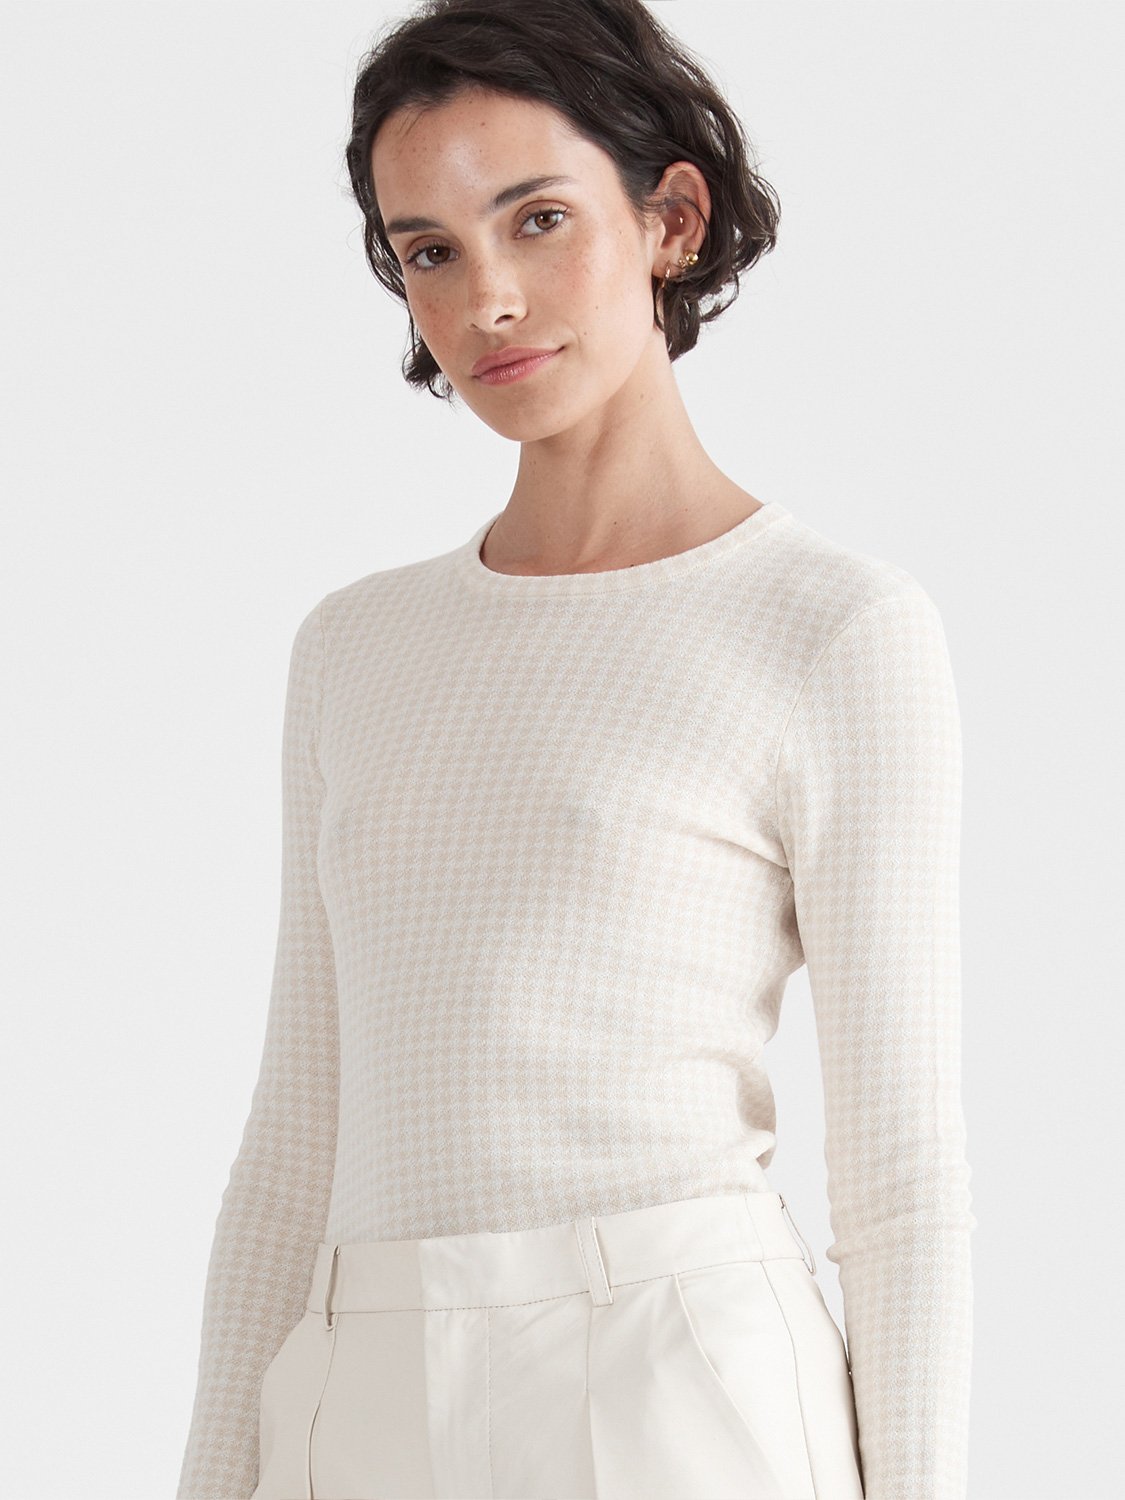 Willow Sheer Knit Top - Houndstooth